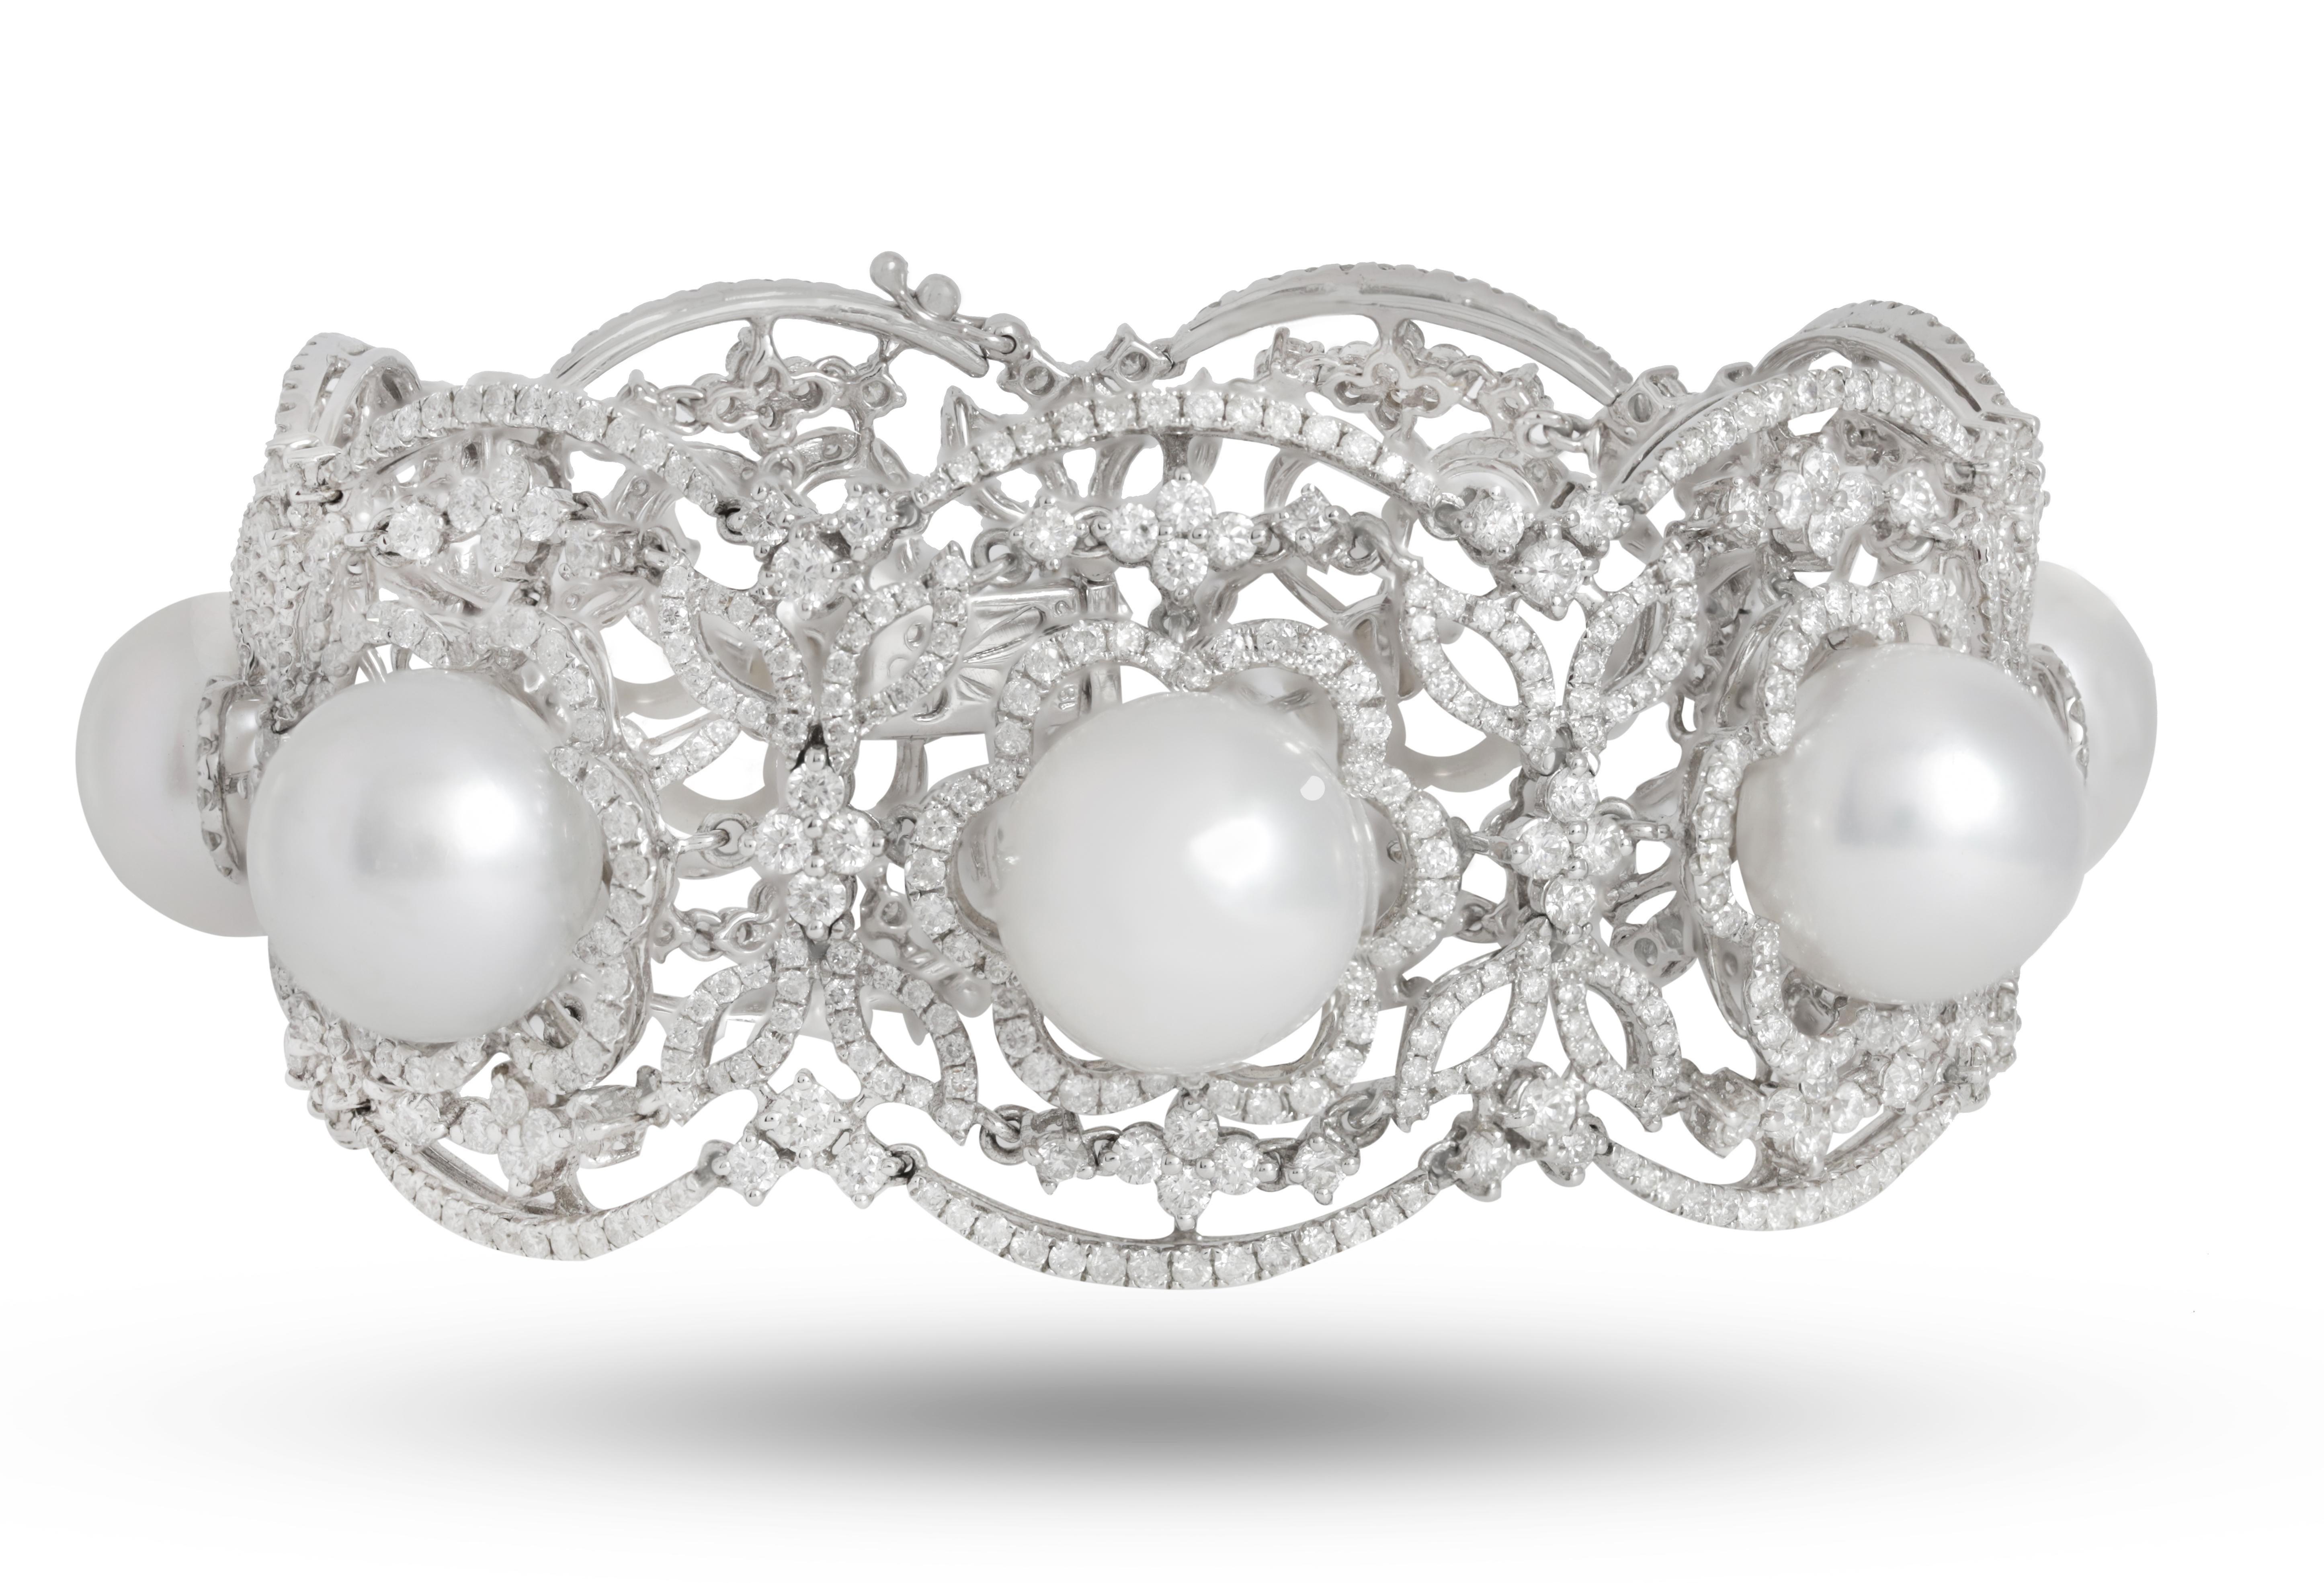 Pear Cut Diana M. 18 kt white gold diamond and pearl fashion bracelet adorned with 13.5  For Sale